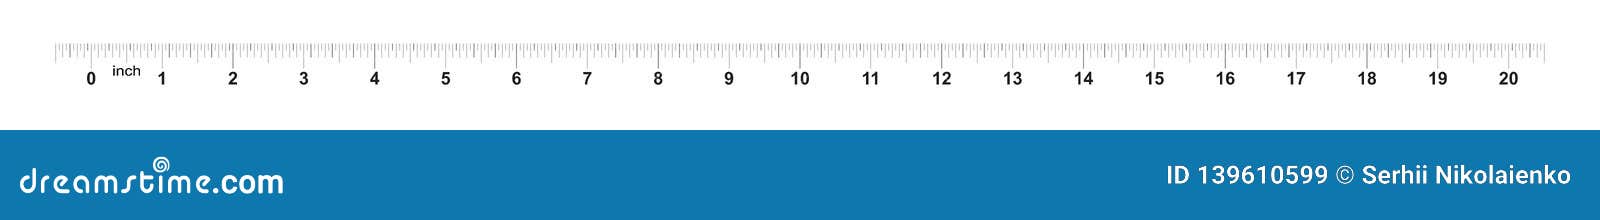 ruler 20 inches metric inch size indicator decimal